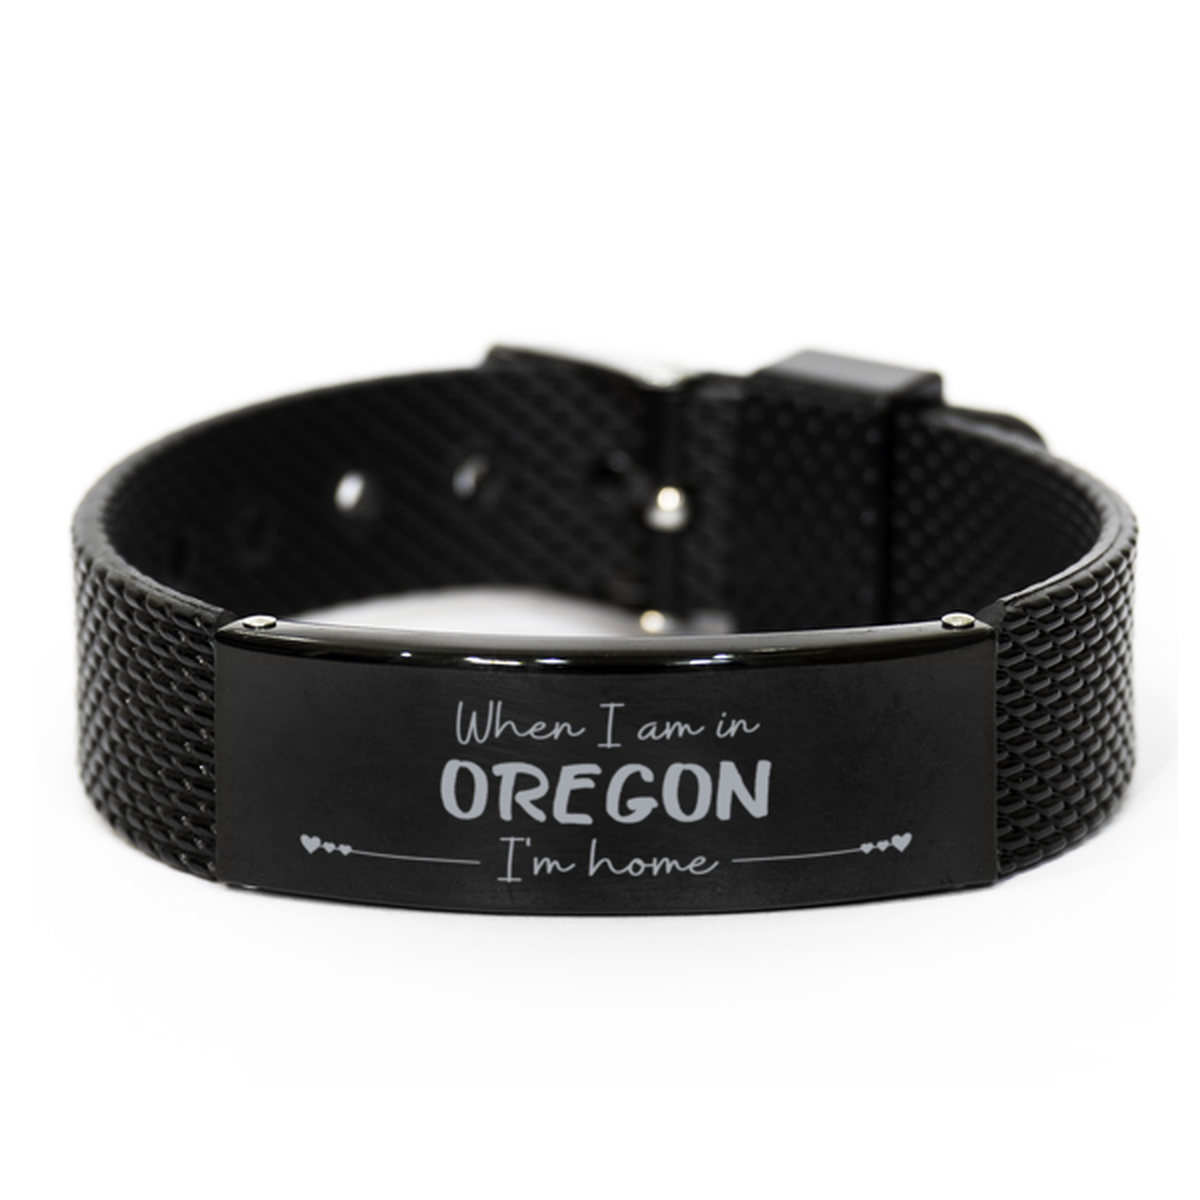 When I am in Oregon I'm home Black Shark Mesh Bracelet, Cheap Gifts For Oregon, State Oregon Birthday Gifts for Friends Coworker